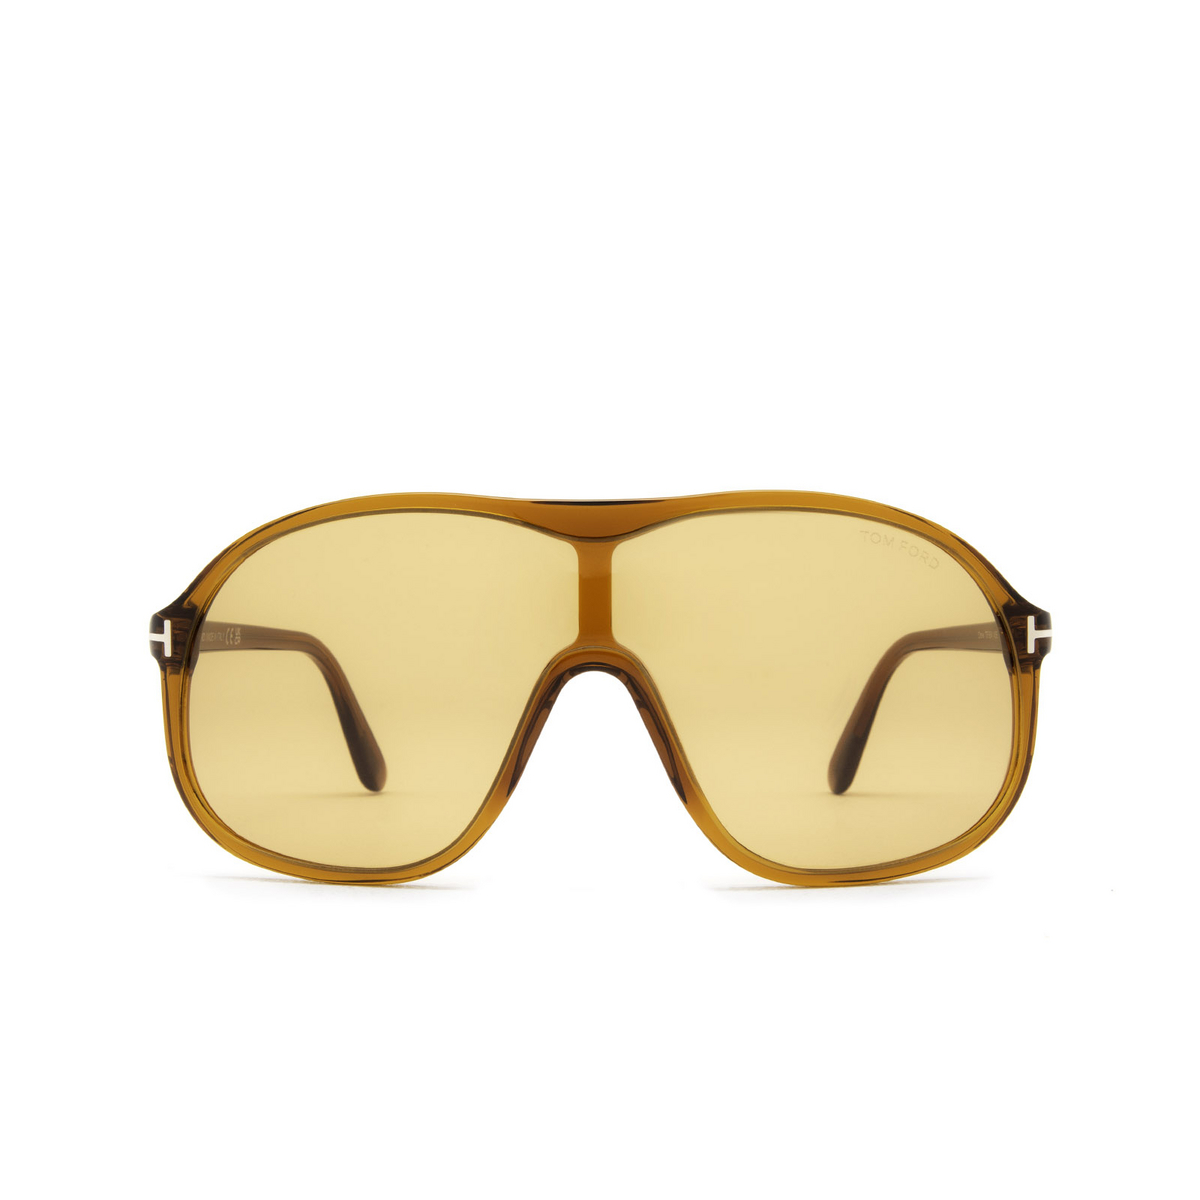 Tom Ford DREW Sunglasses 45E Light Brown - front view